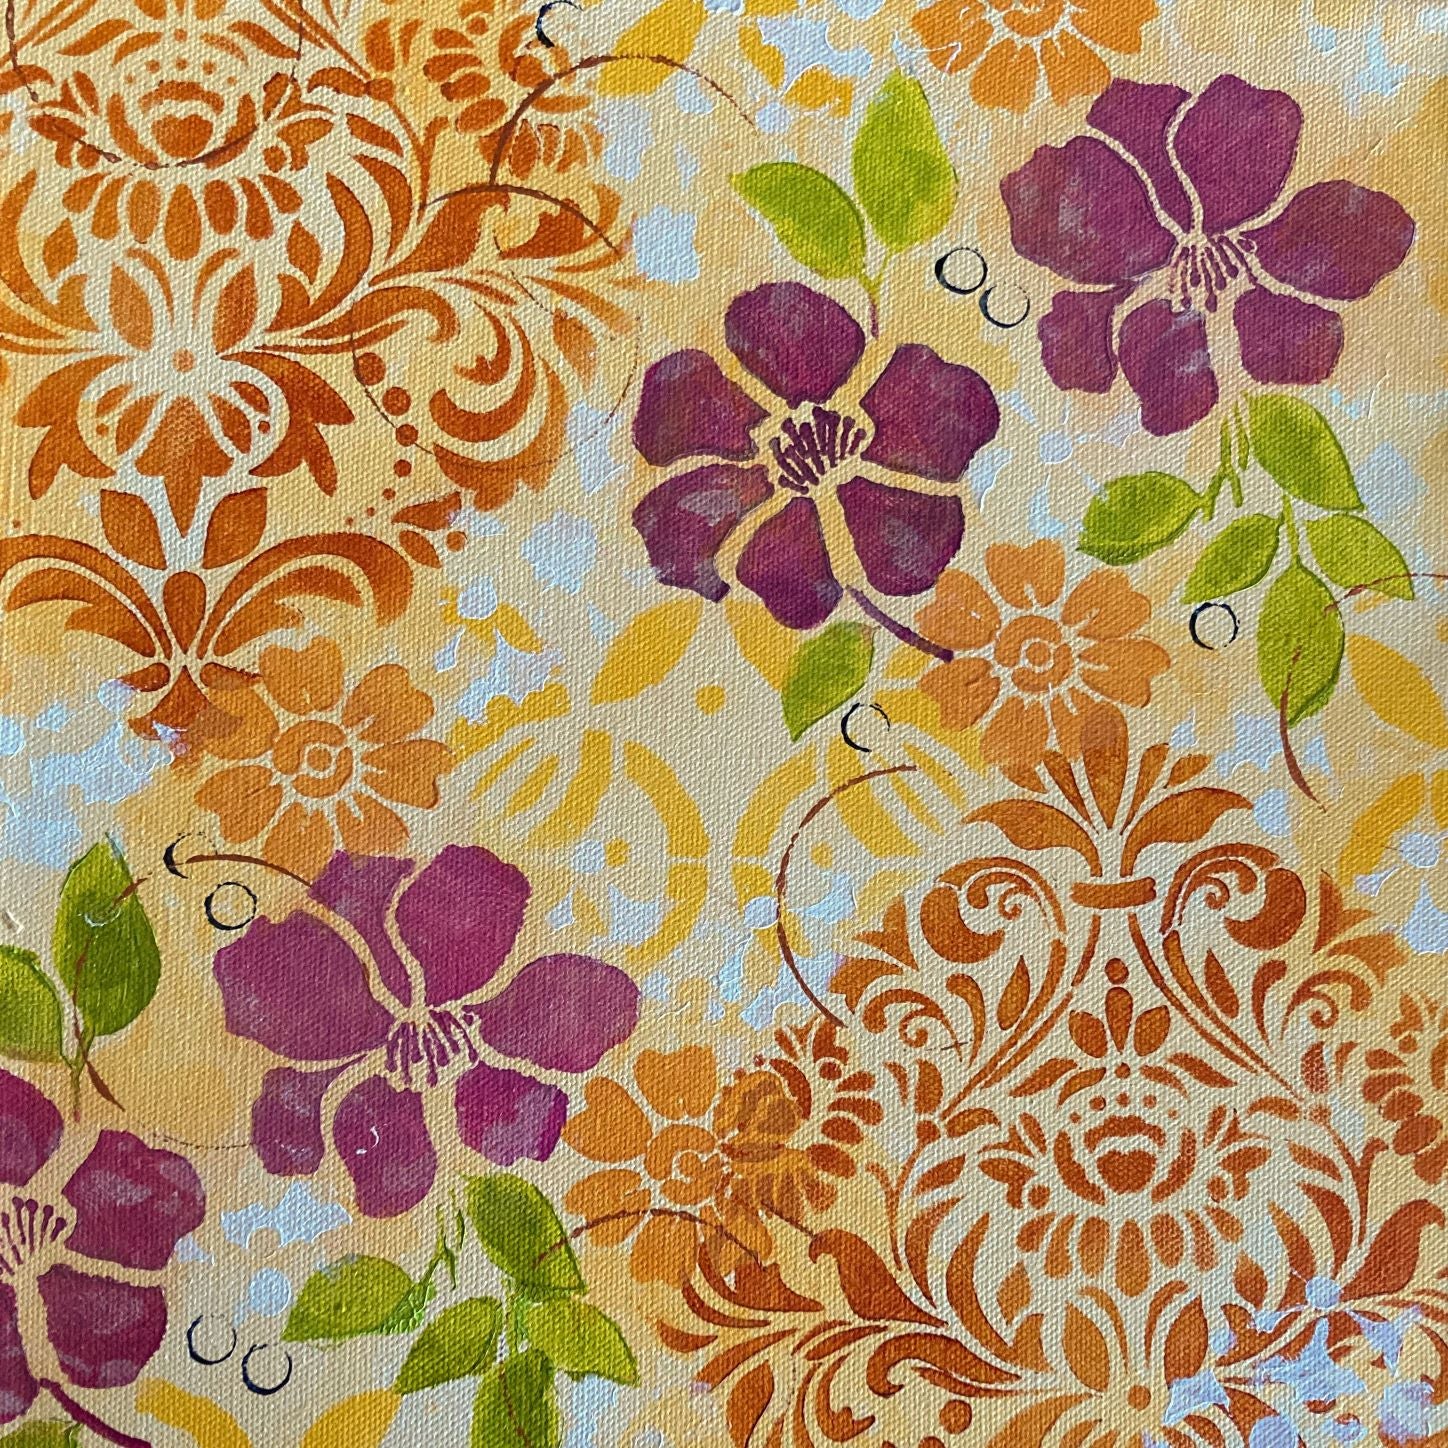 floral Hawaiian theme acrylic painting on canvas dark pink flowers orange flowers green leaves circles and scrolling shapes warm and cheerful